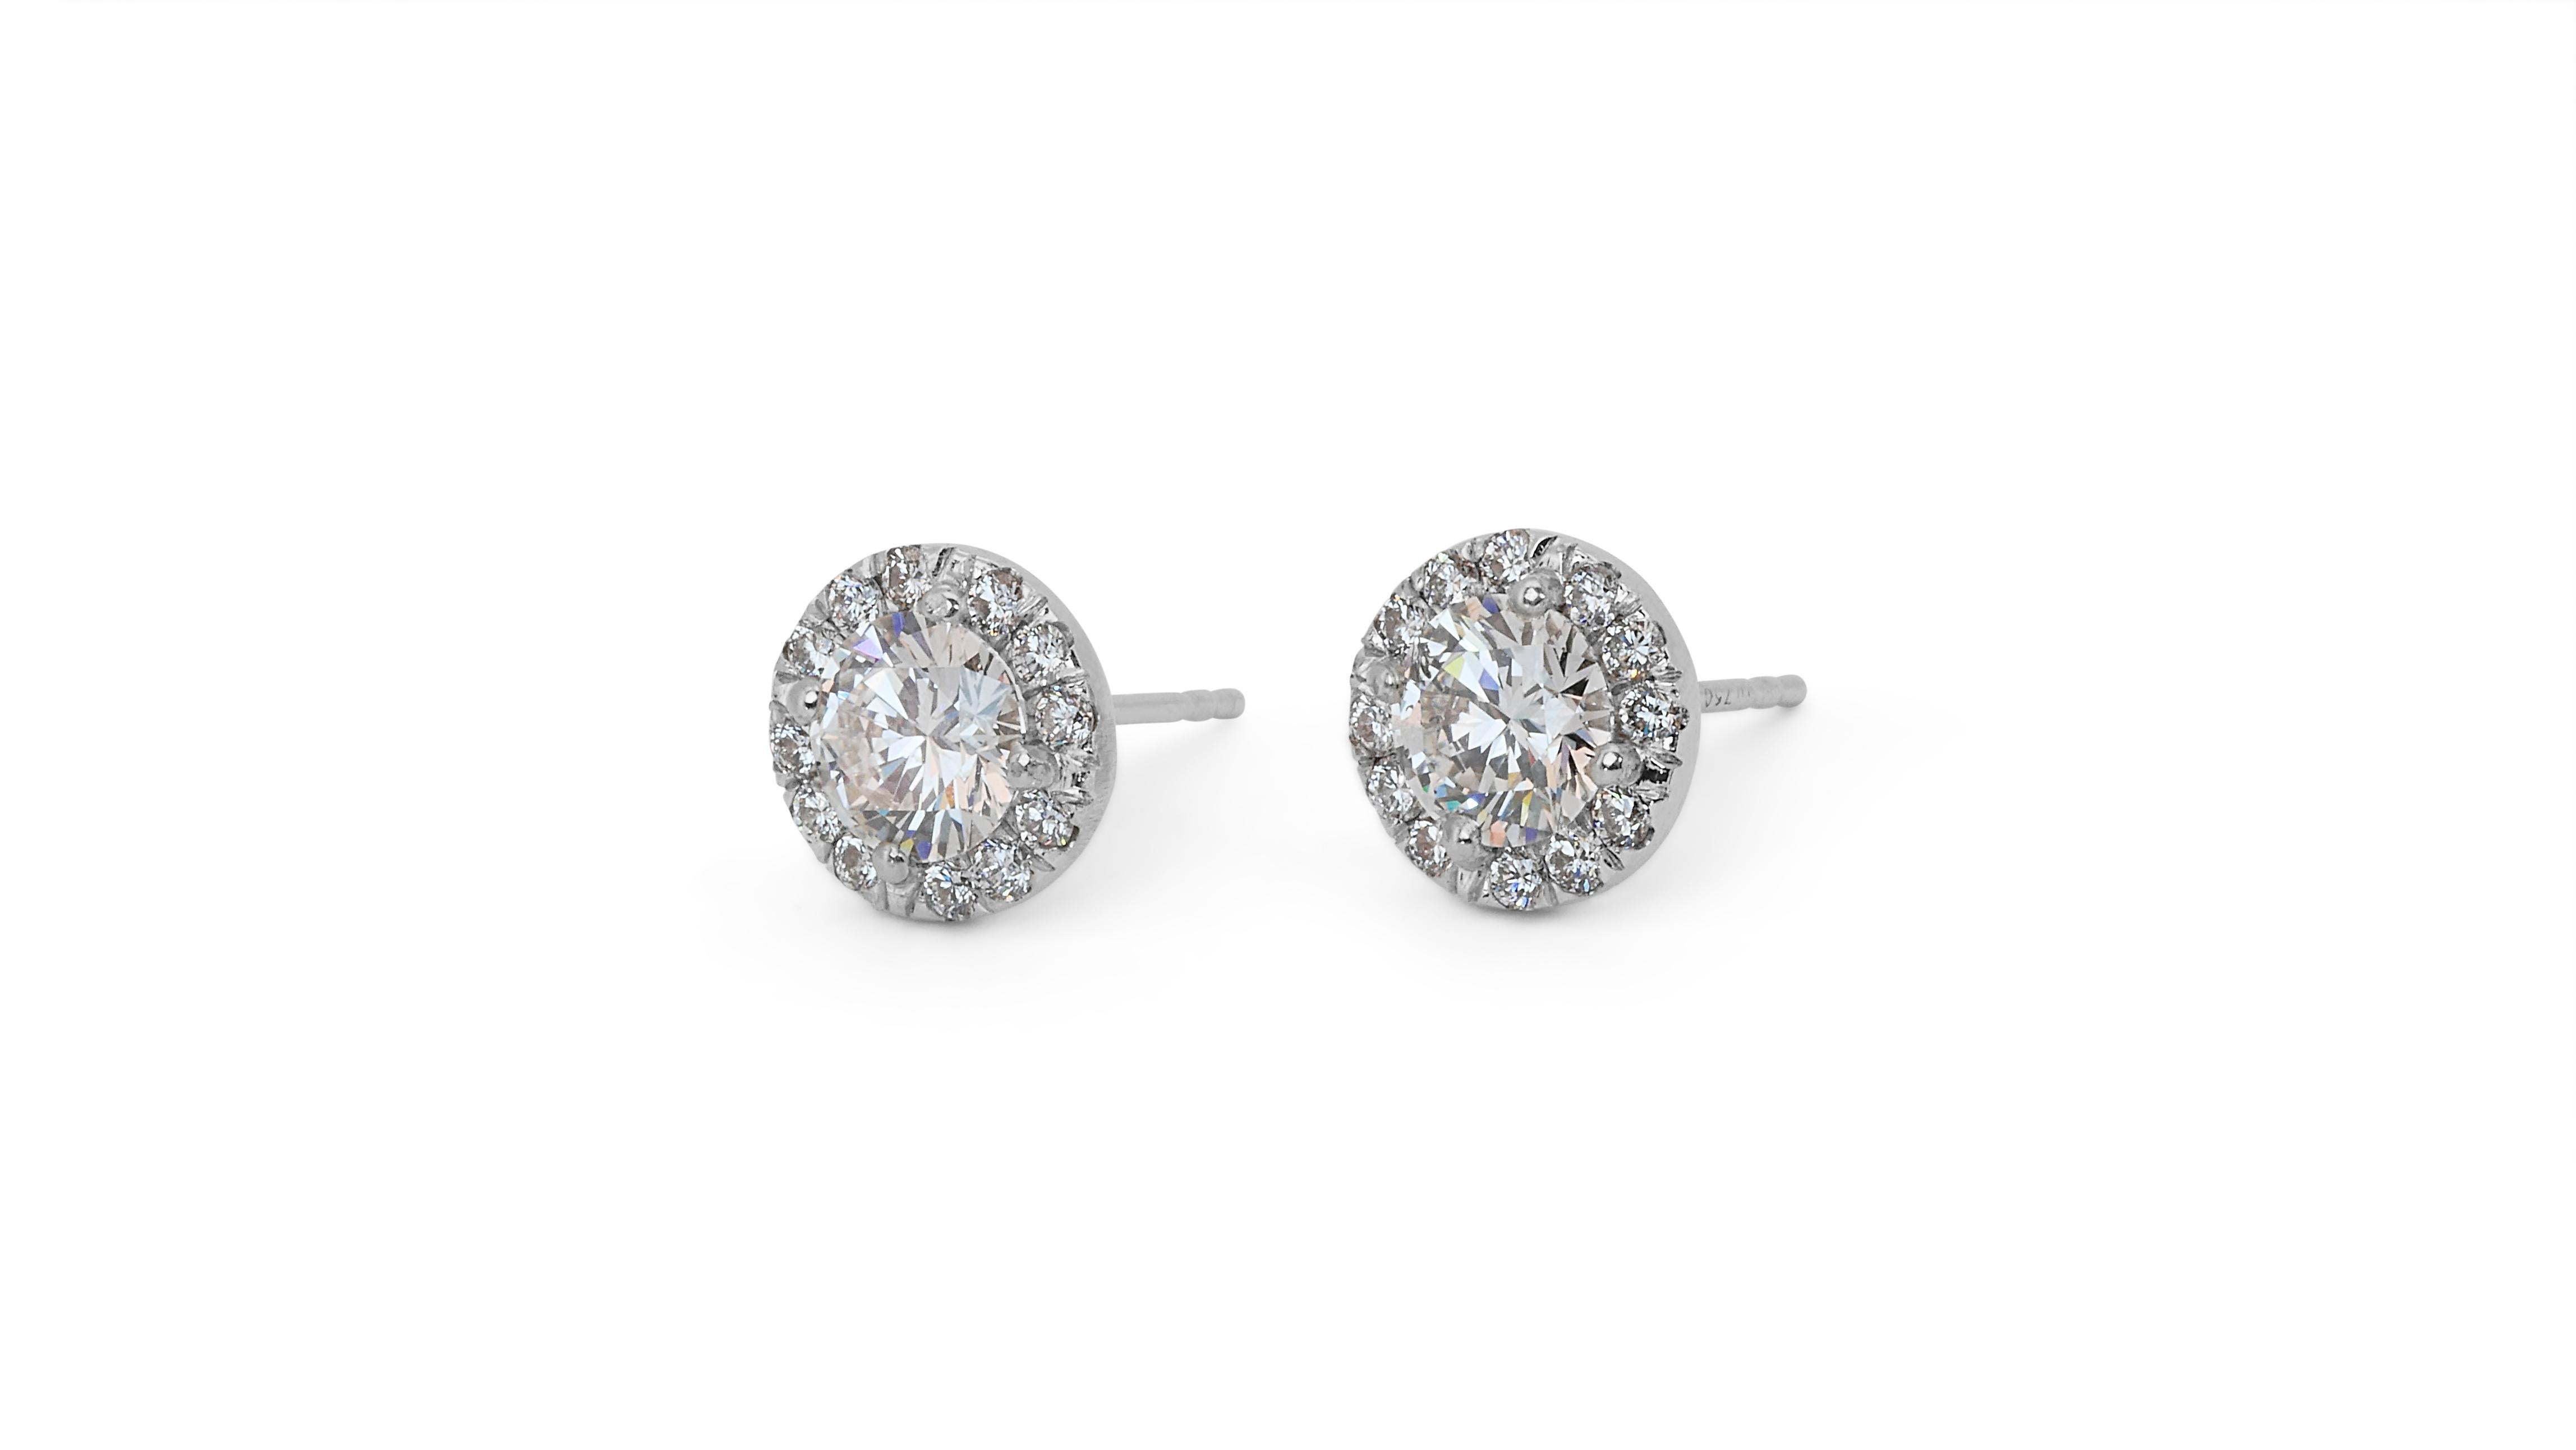 Round Cut Lustrous 2.57ct Diamond Stud Earrings in 18k White Gold - GIA Certified For Sale